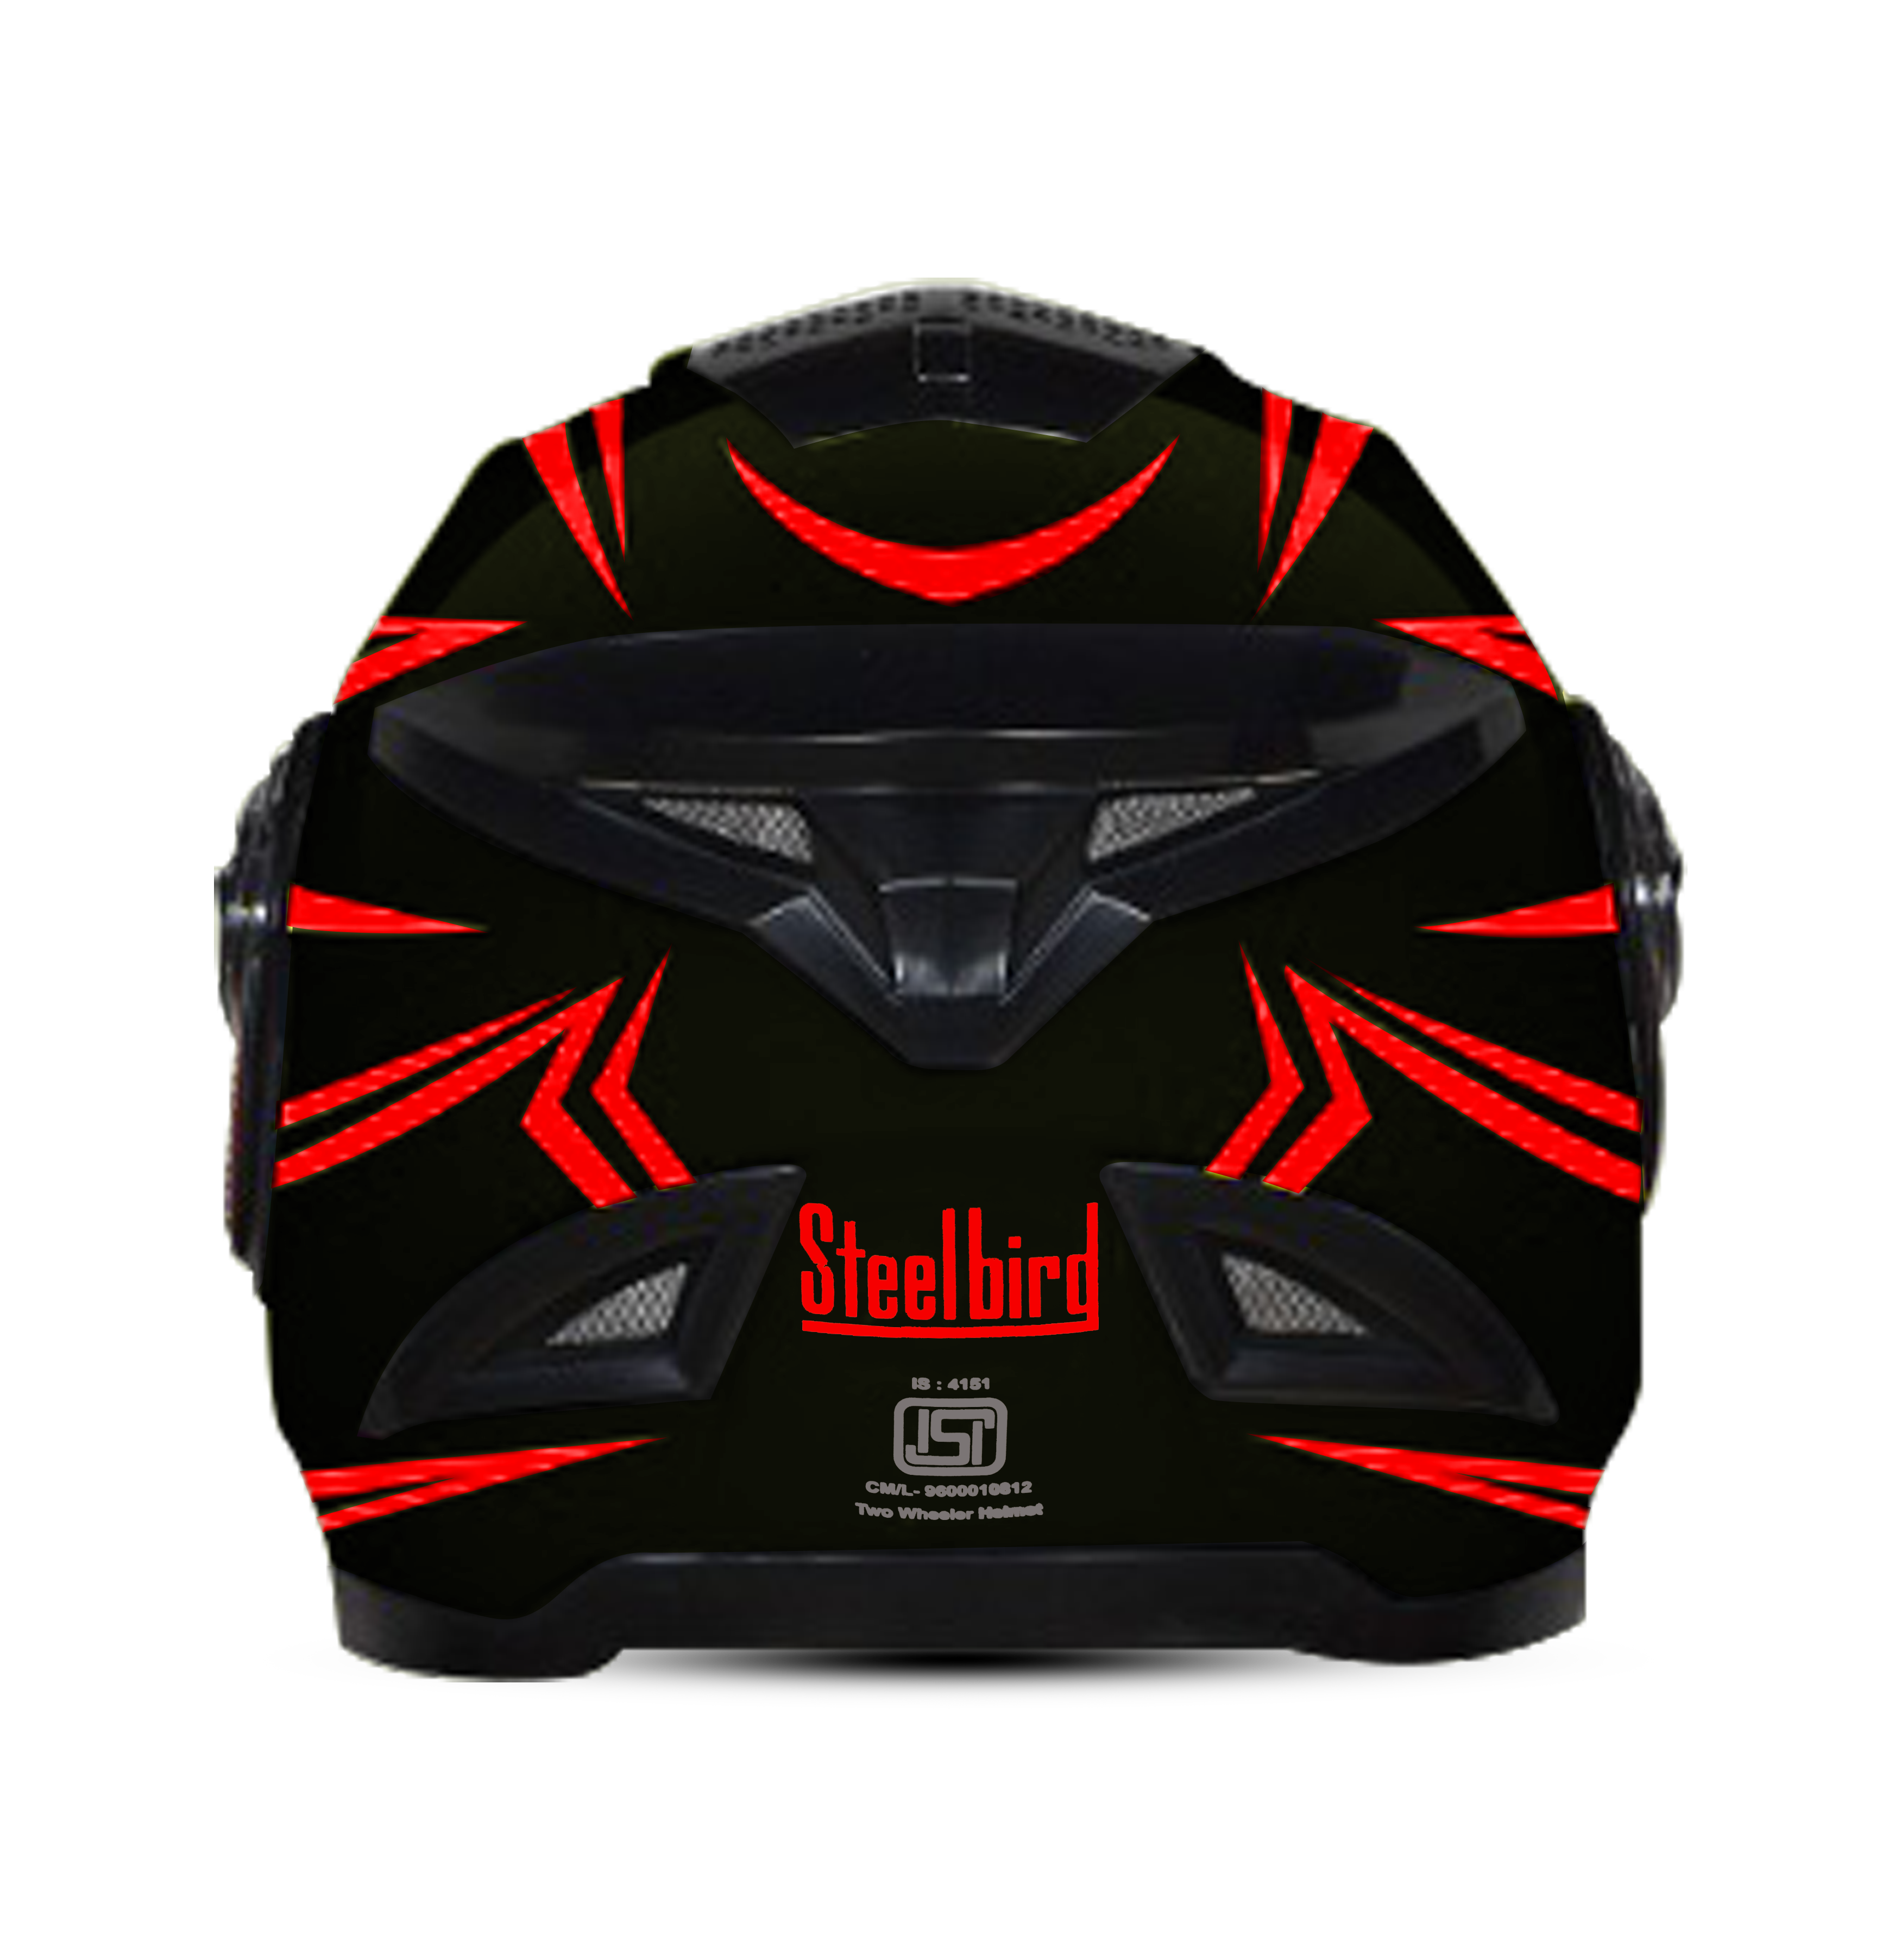 SBH-17 ROBOT REFLECTIVE MAT BLACK WITH RED (FITTED WITH CLEAR VISOR EXTRA GOLD CHROME  VISOR FREE)